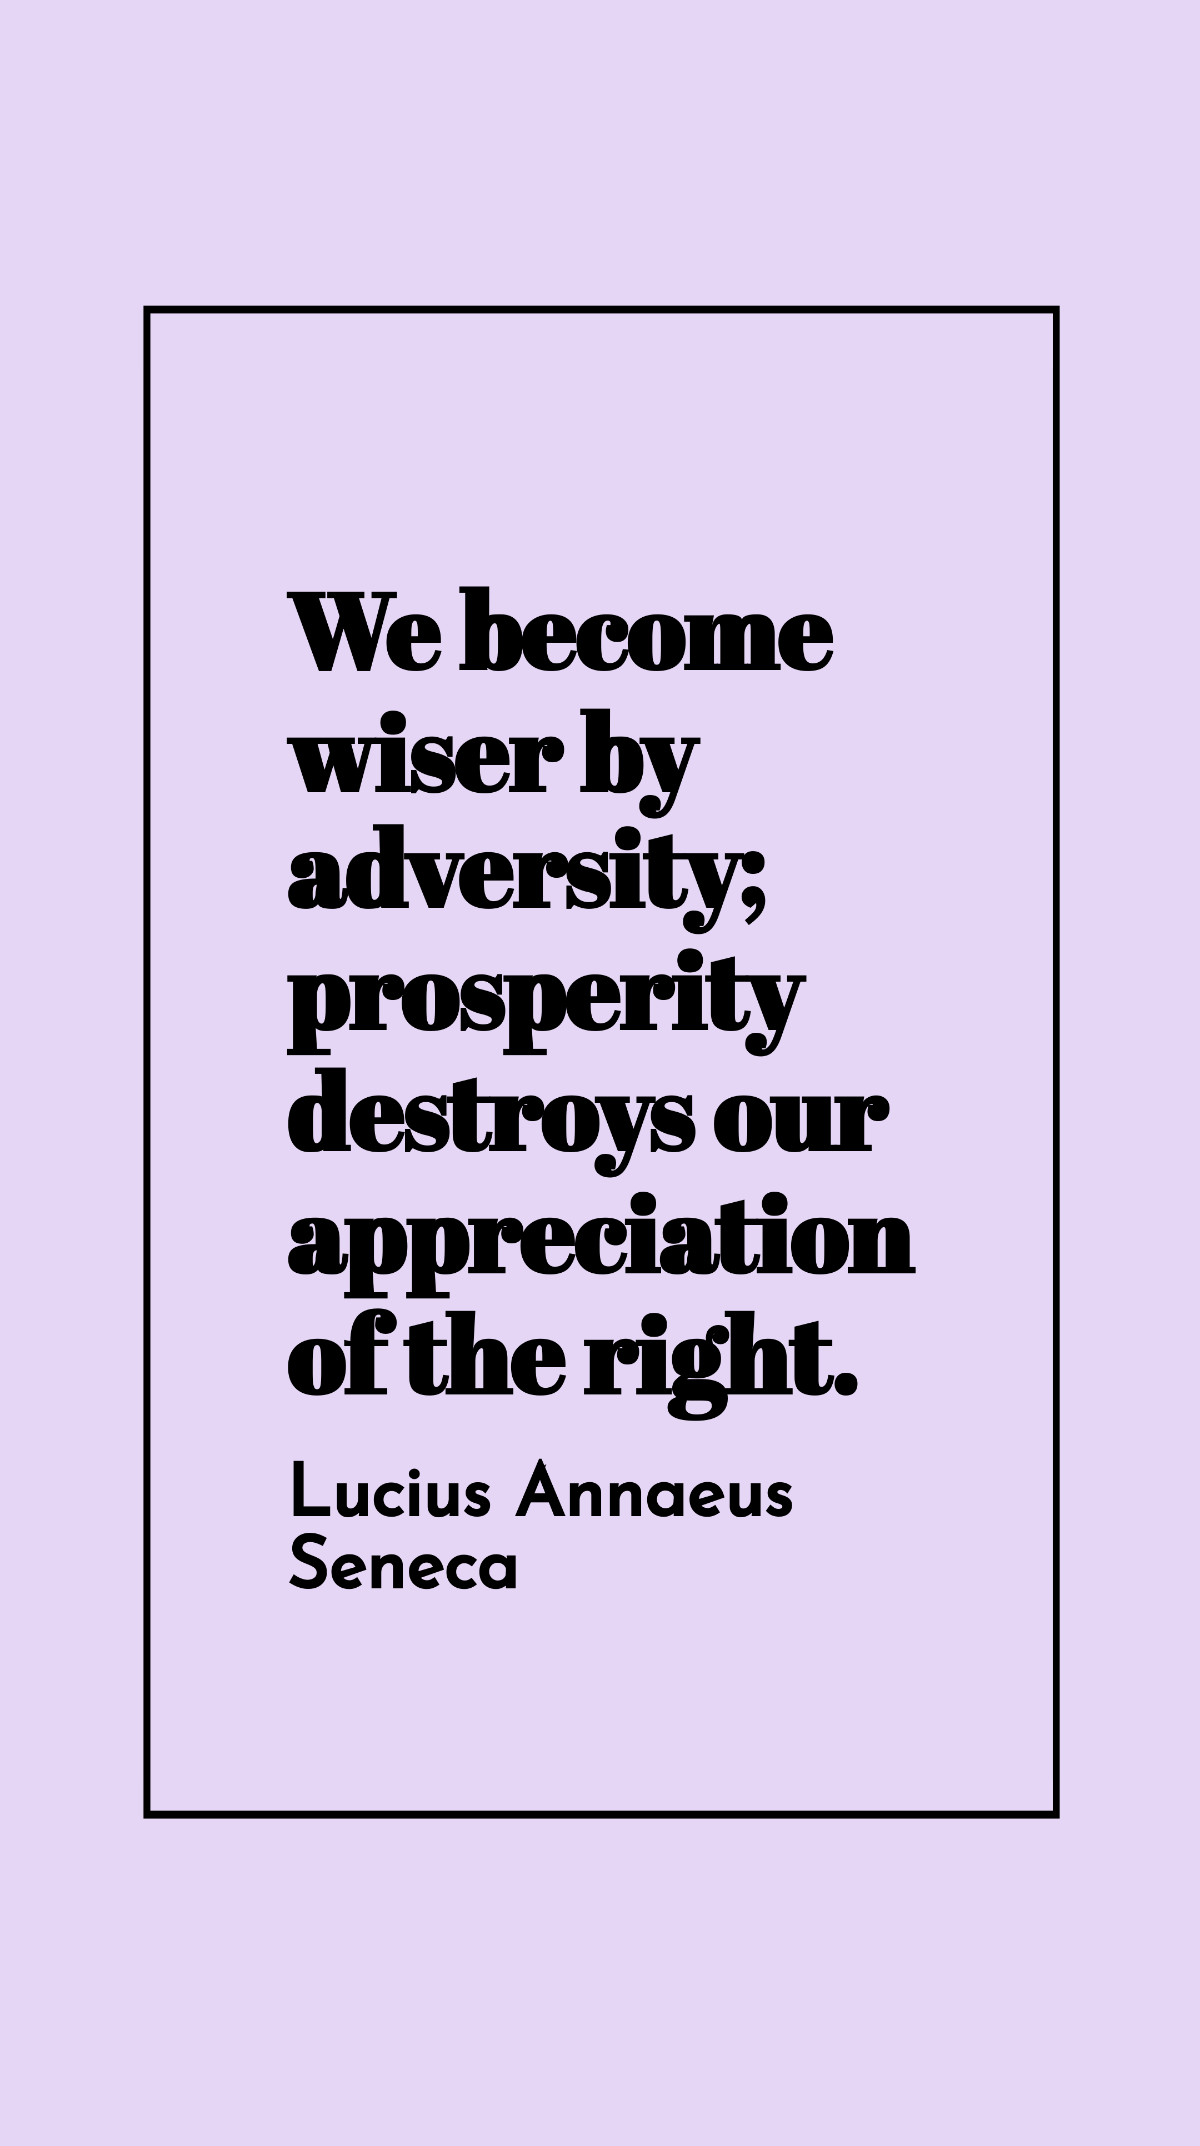 Lucius Annaeus Seneca - We become wiser by adversity; prosperity destroys our appreciation of the right. Template